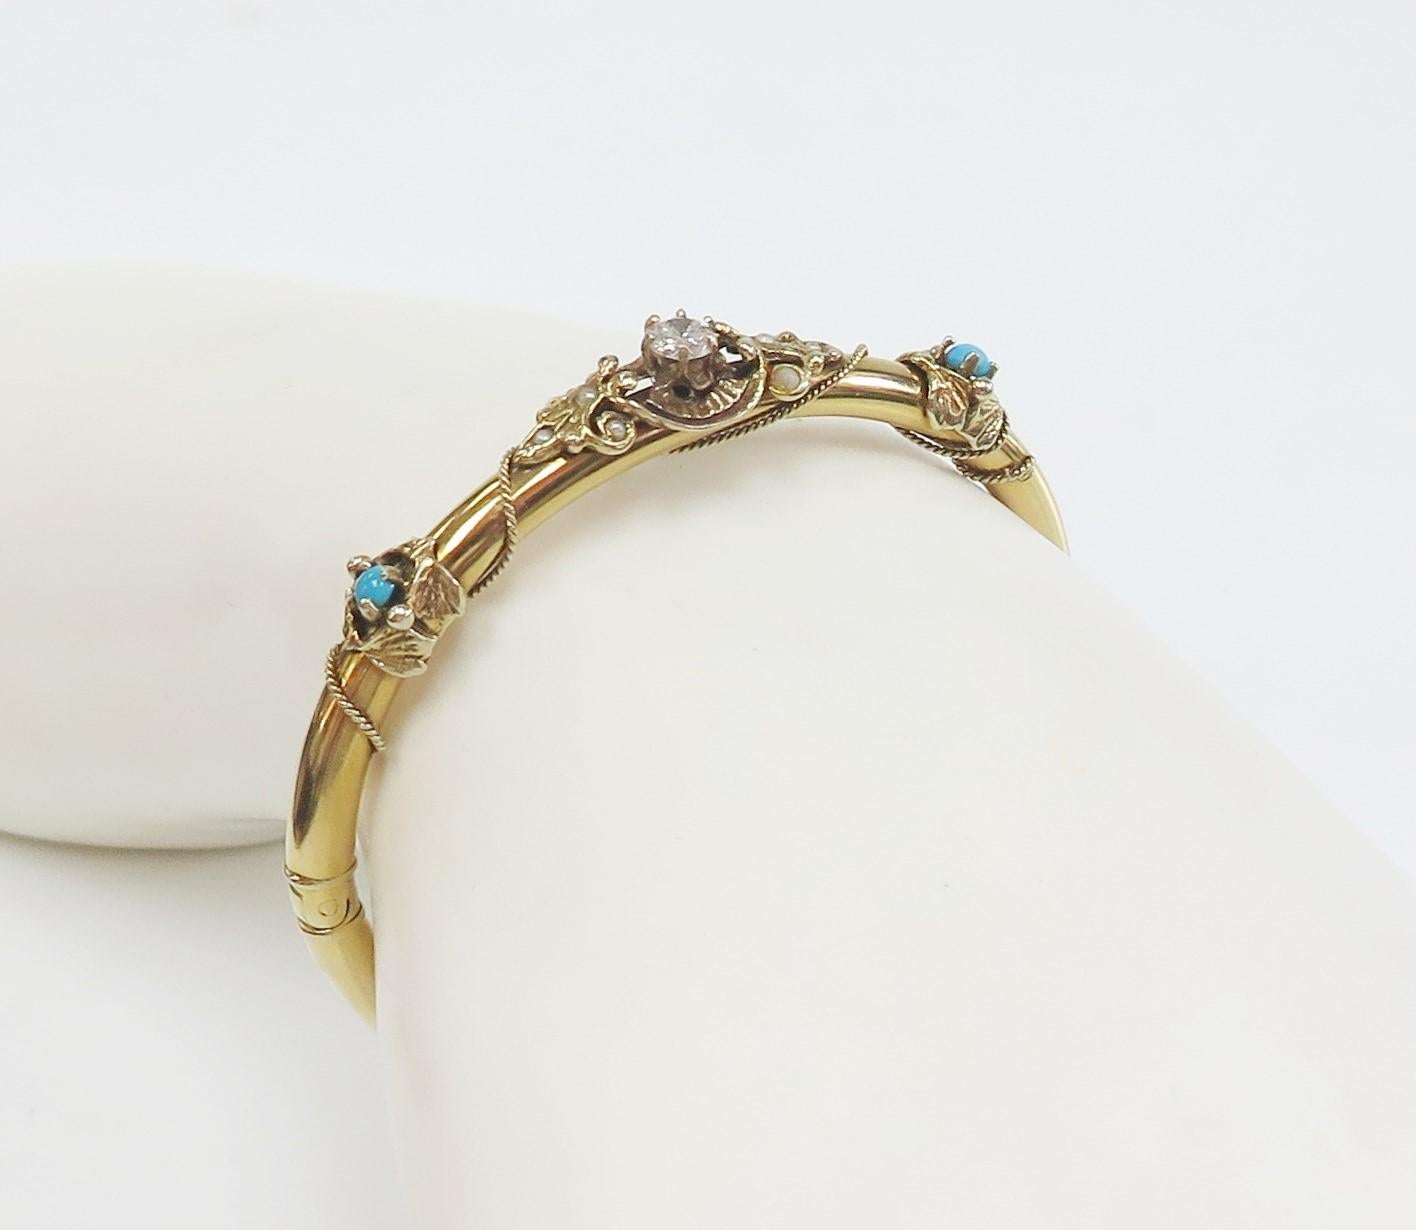 Antique Bangle Bracelet with Diamond, Turquoise, and Seed Pearls 14 Karat In Good Condition For Sale In Bellmore, NY